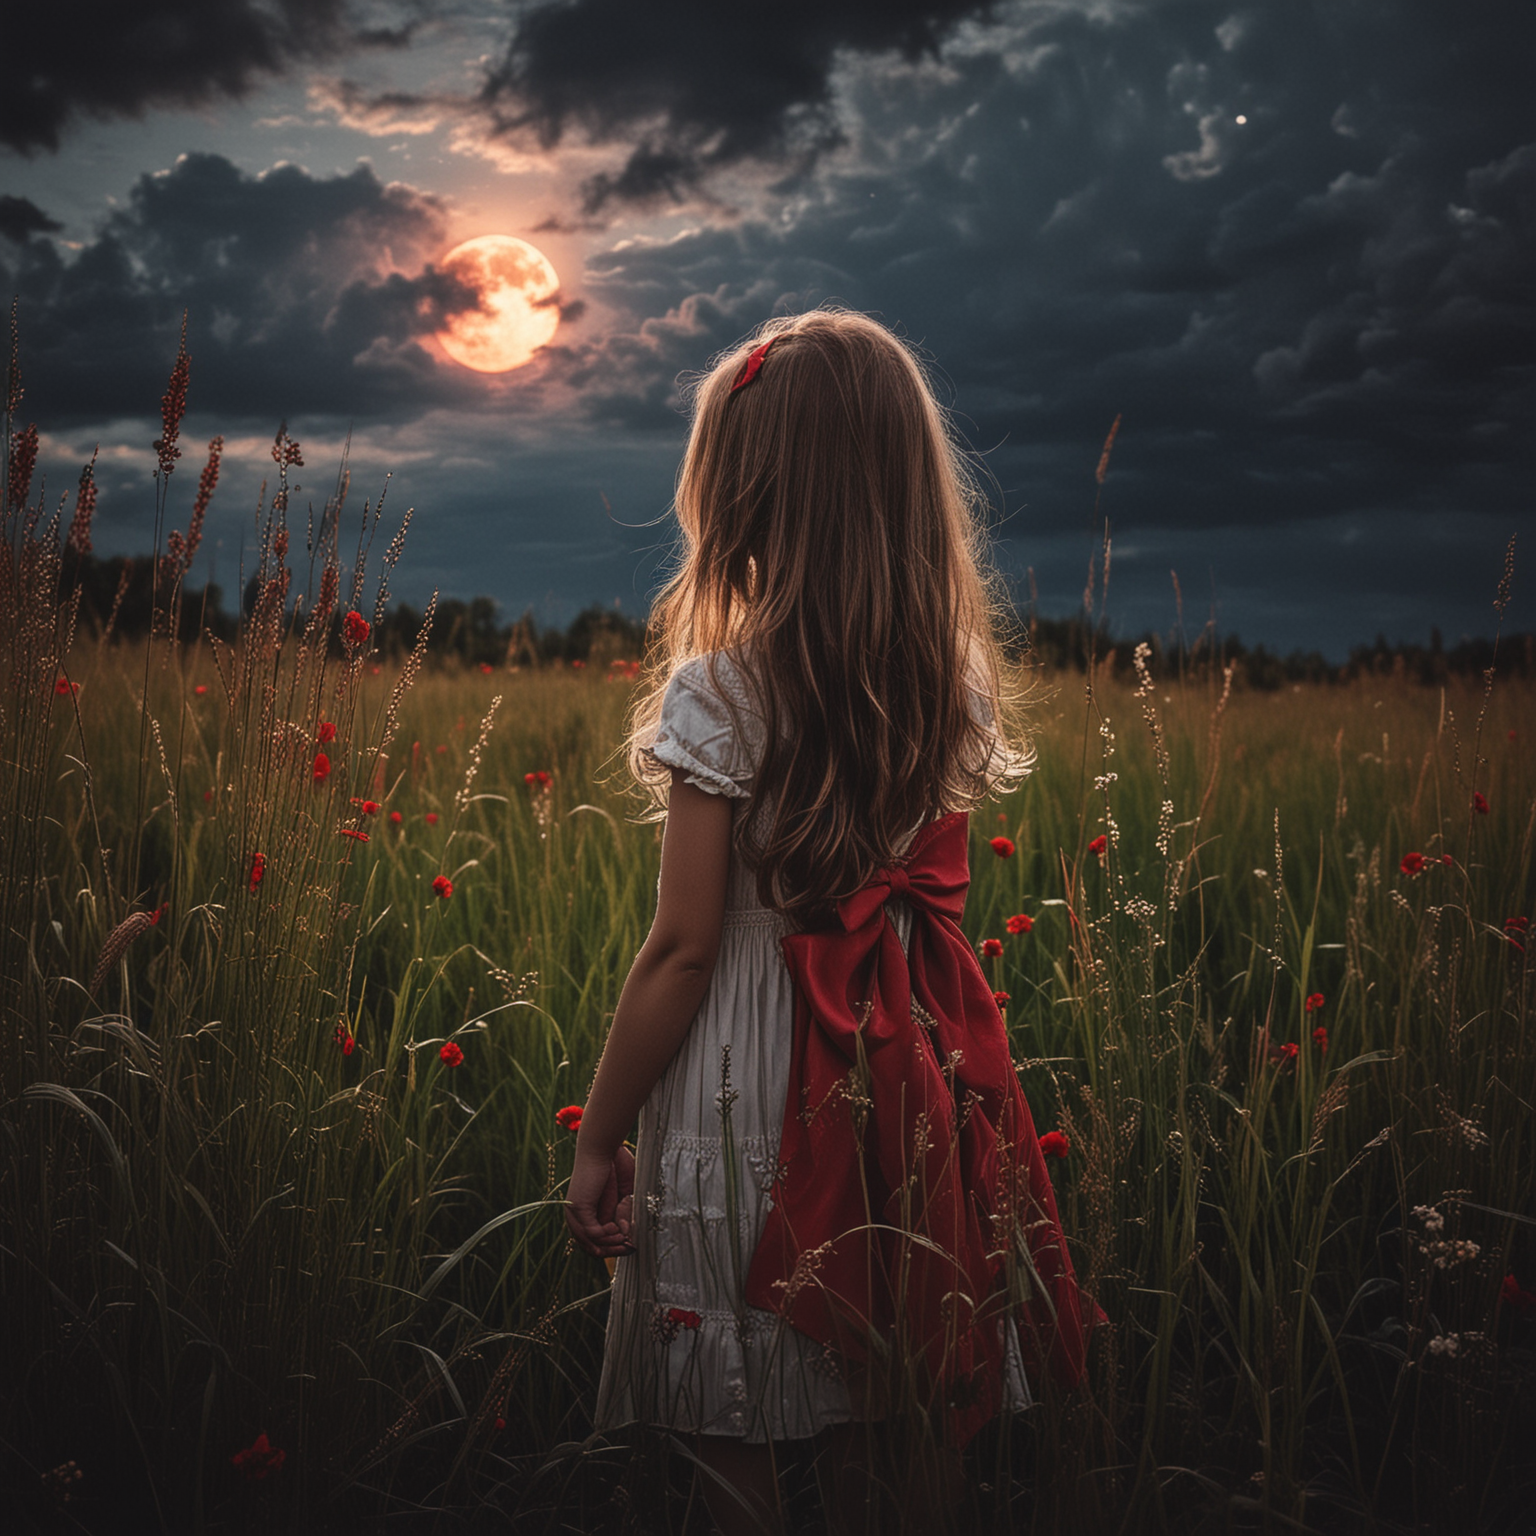 Lonely Child with Long Hair Standing in Backlit High Grass under Stormy Moonlight